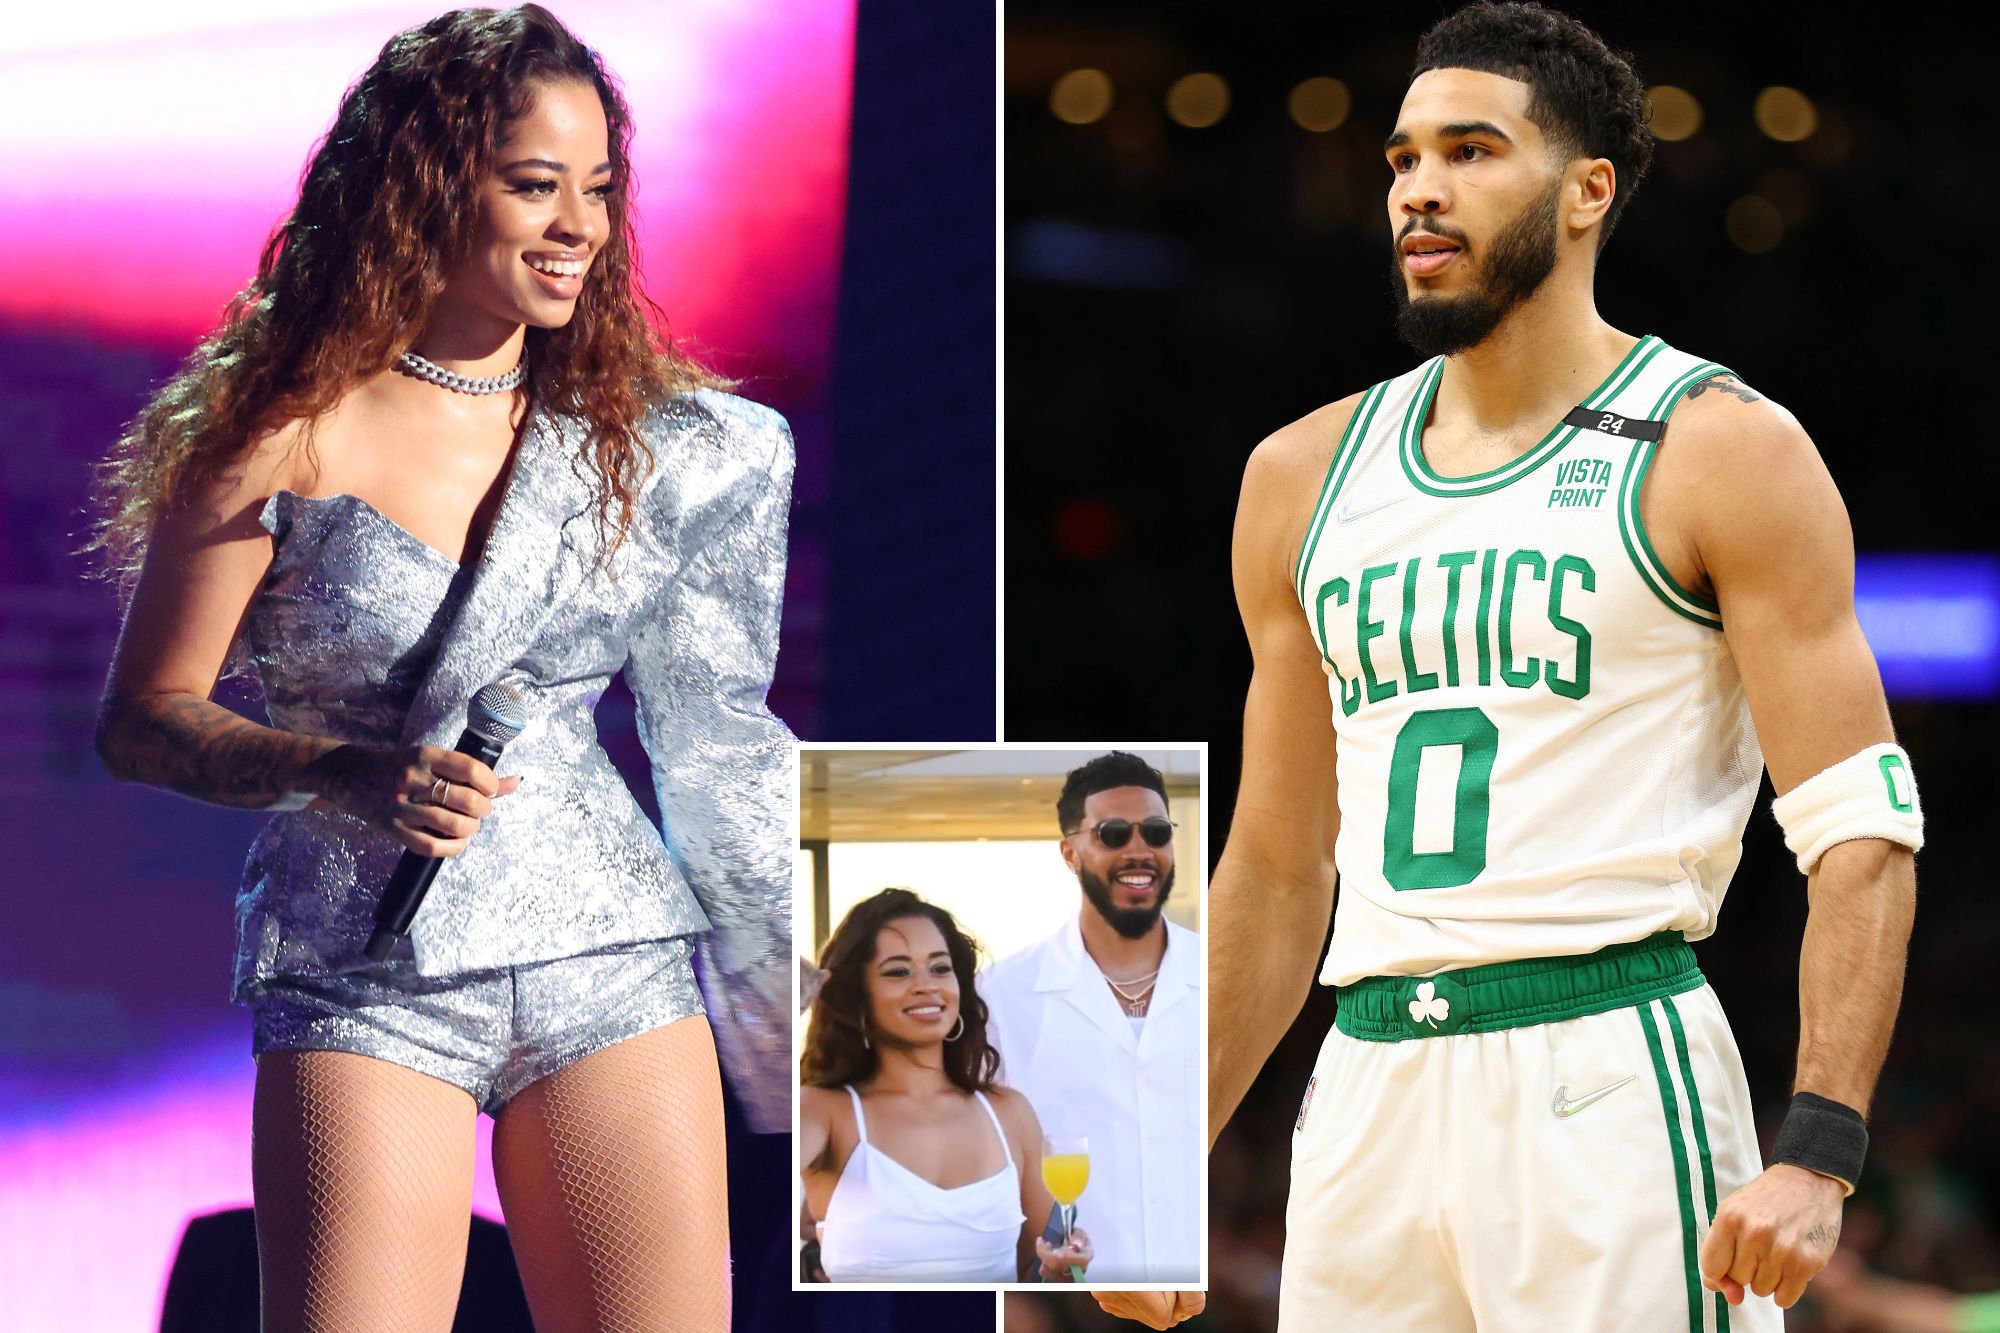 Who is Jayson Tatum’s Wife? Has Jayson Tatum Been Married Before? The